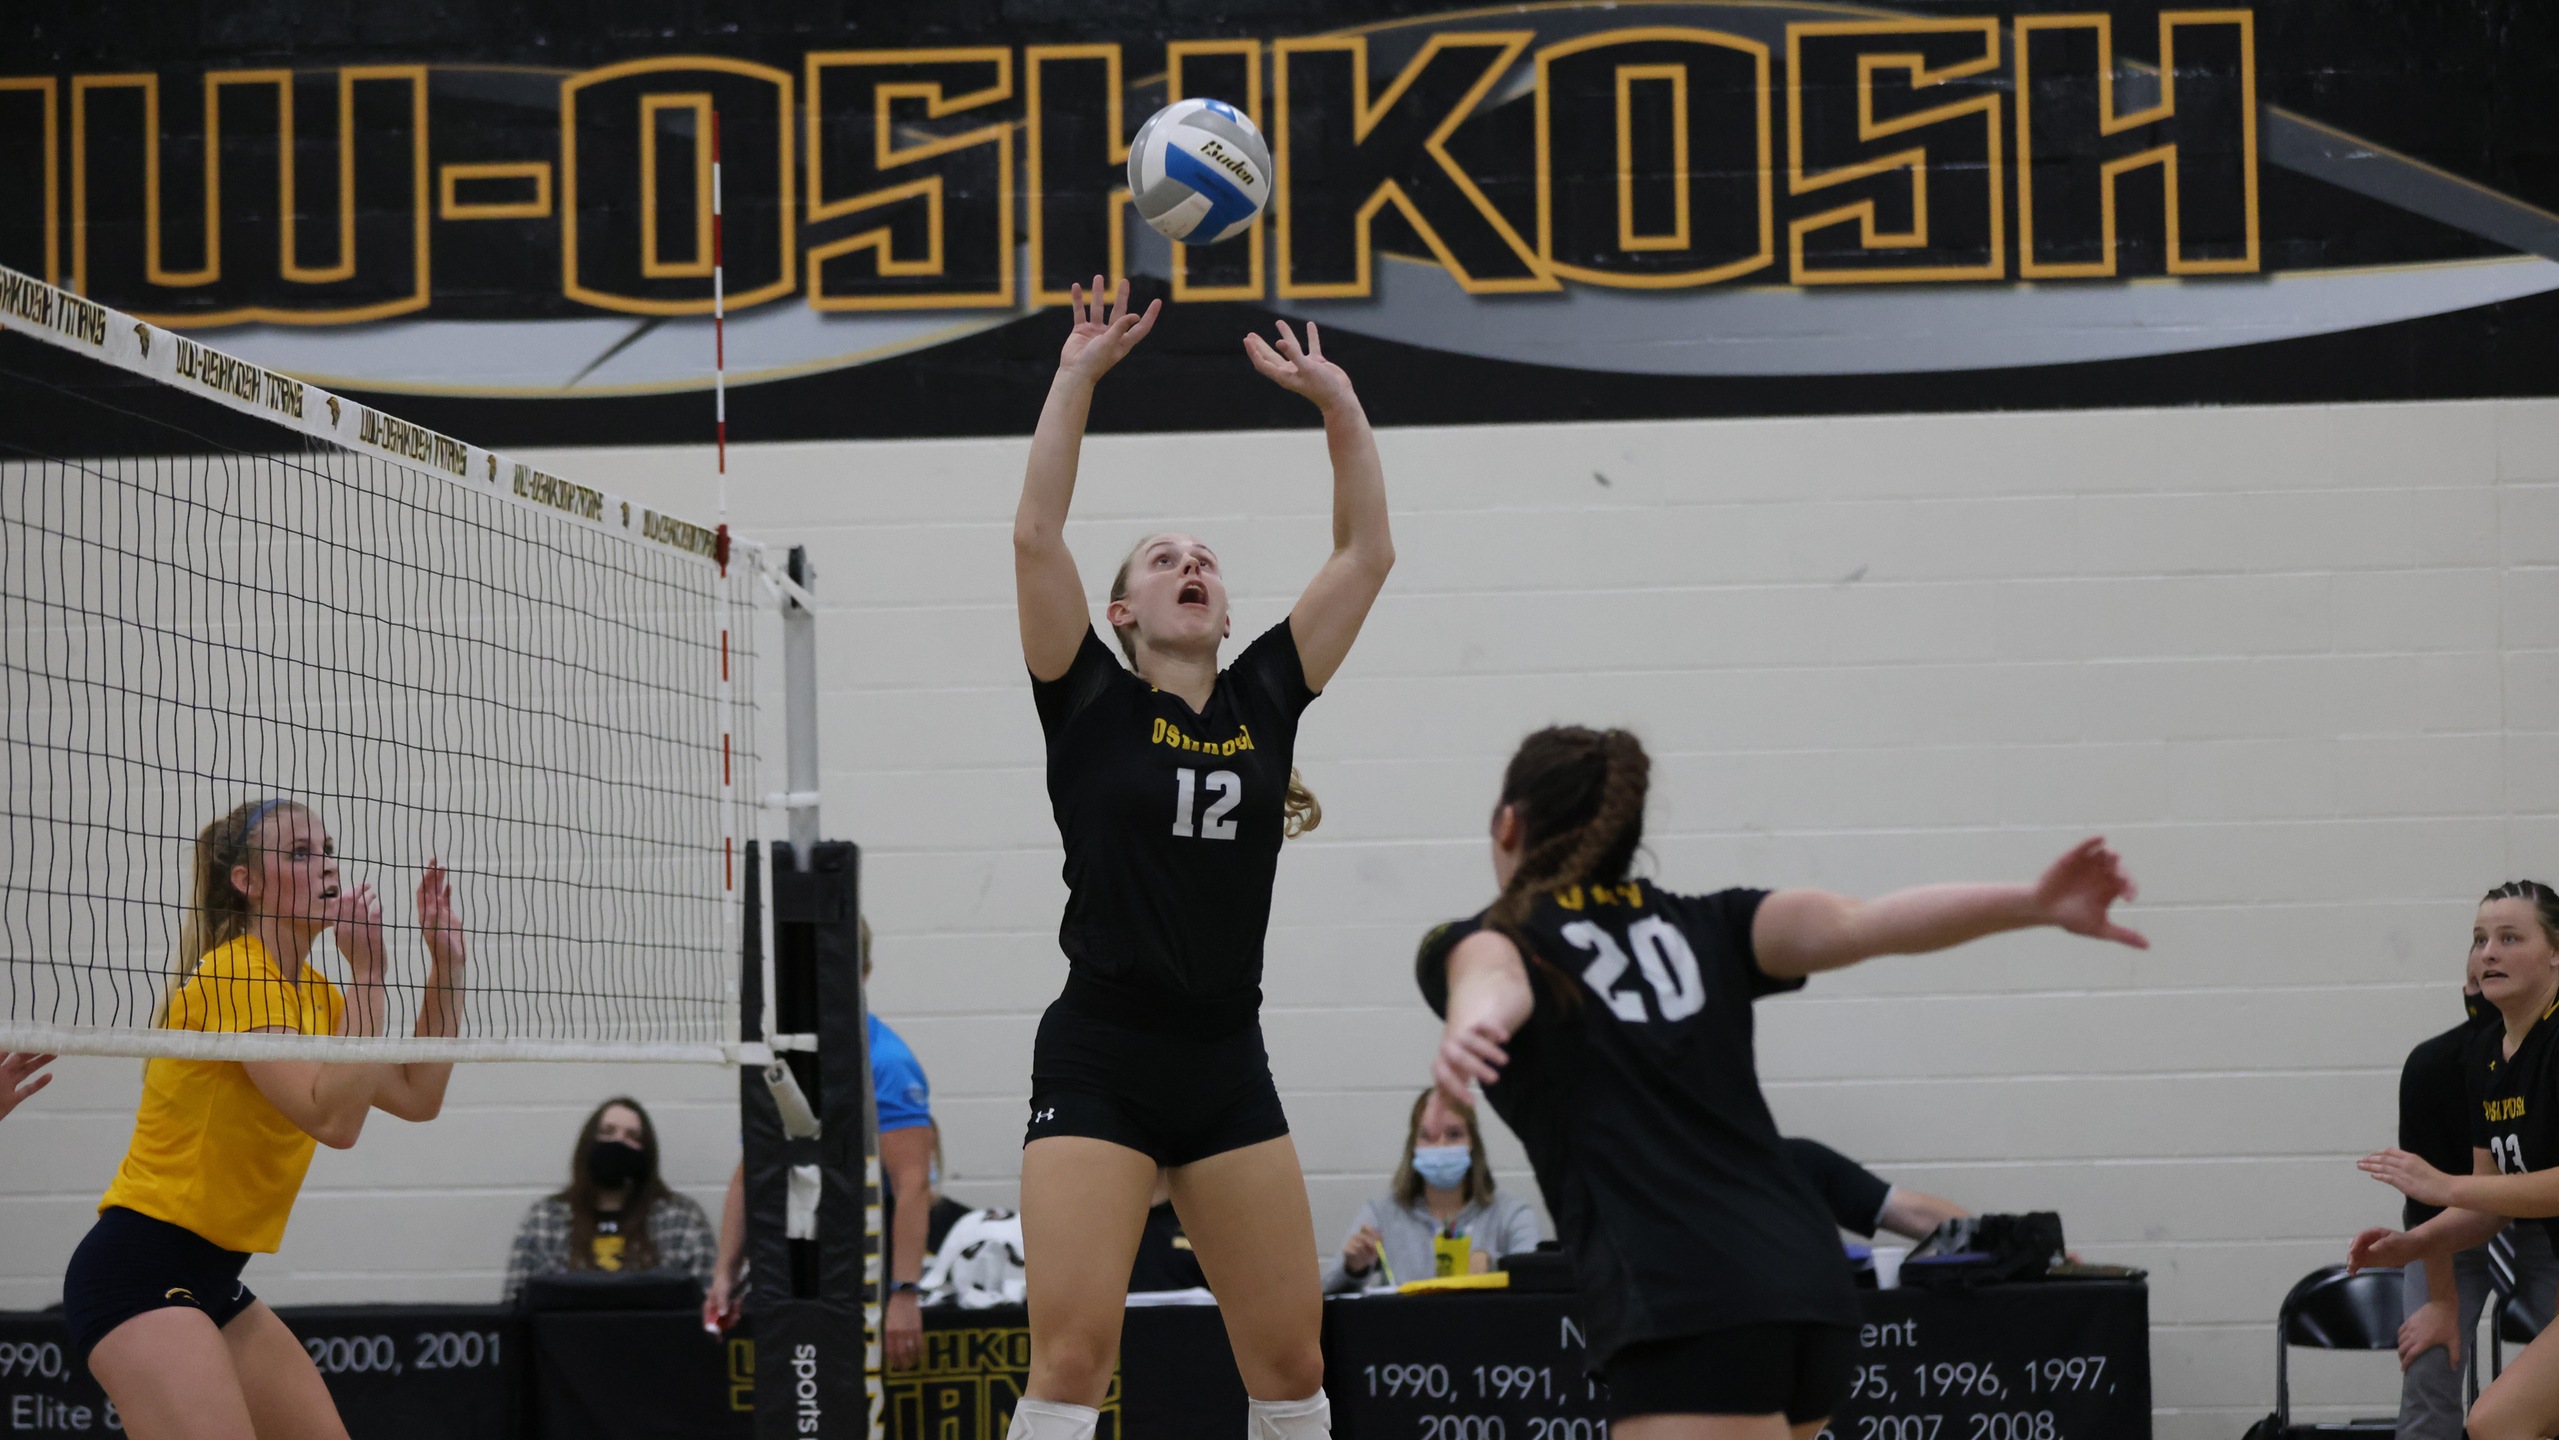 Emma Kiekhofer had 11 assists, seven digs and one service ace against the Blugolds.